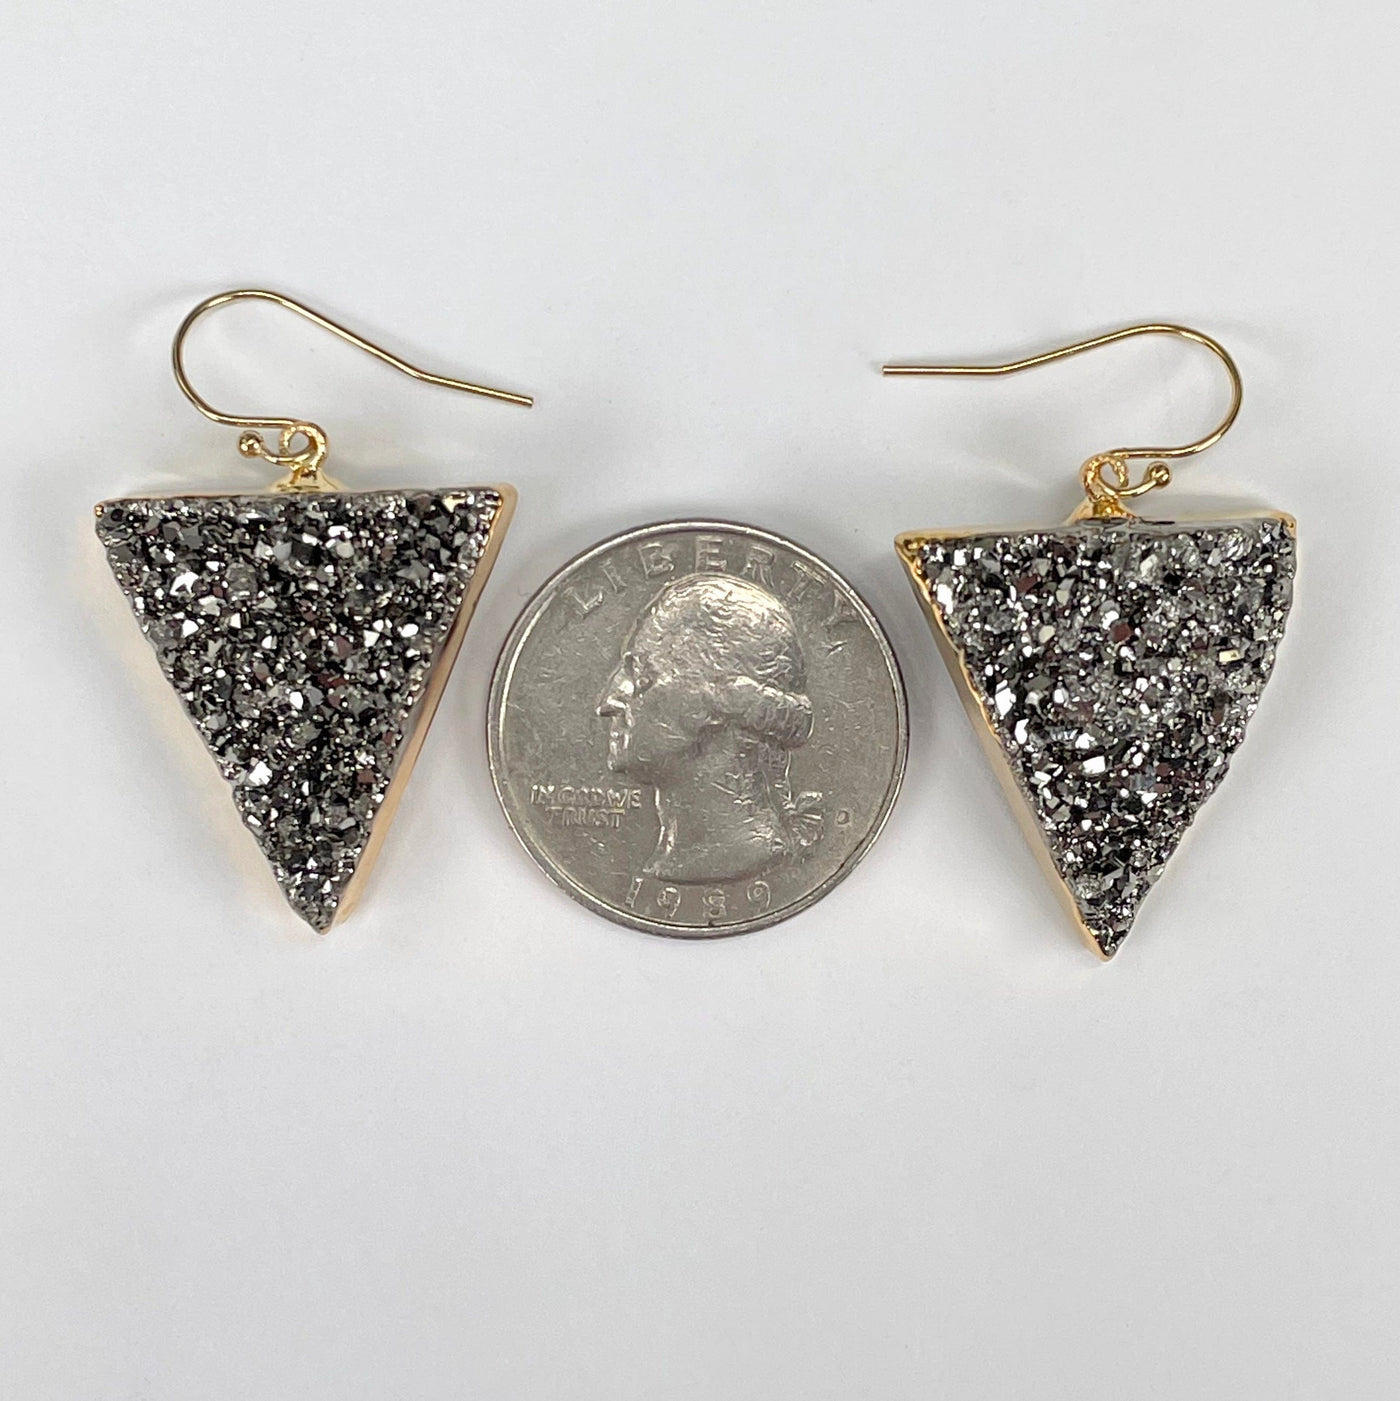 druzy earrings with quarter for size reference